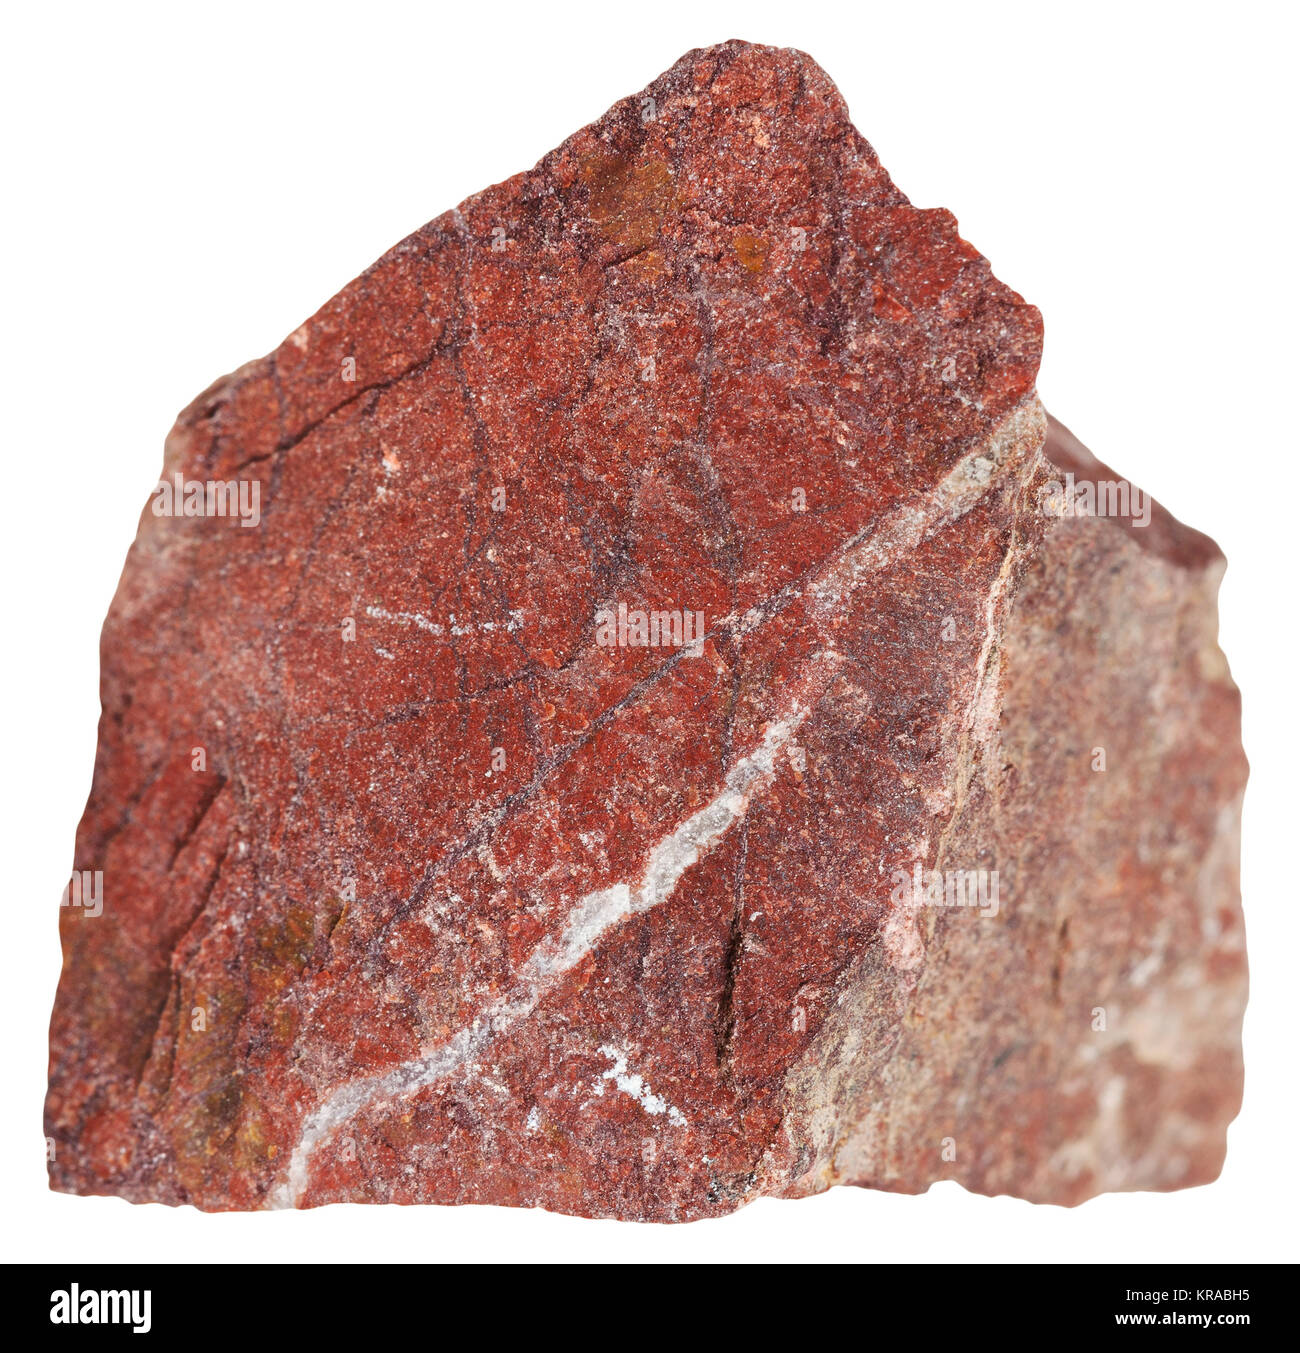 piece of red jasper mineral isolated Stock Photo